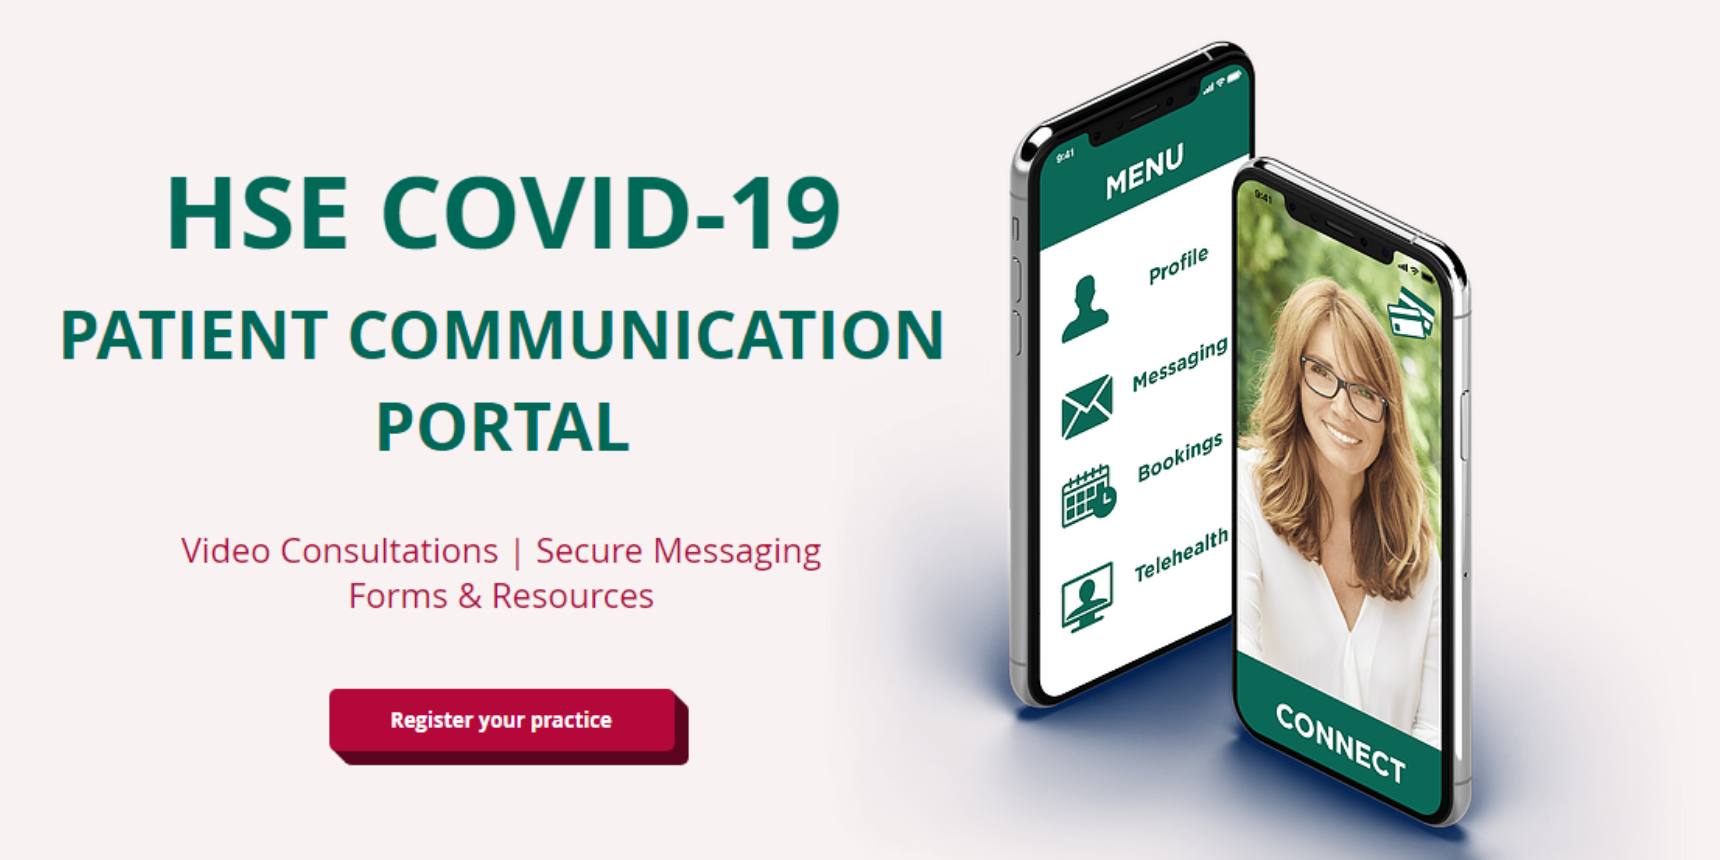 EIT Health-supported venture delivers secure patient communication portal in the wake of COVID-19 